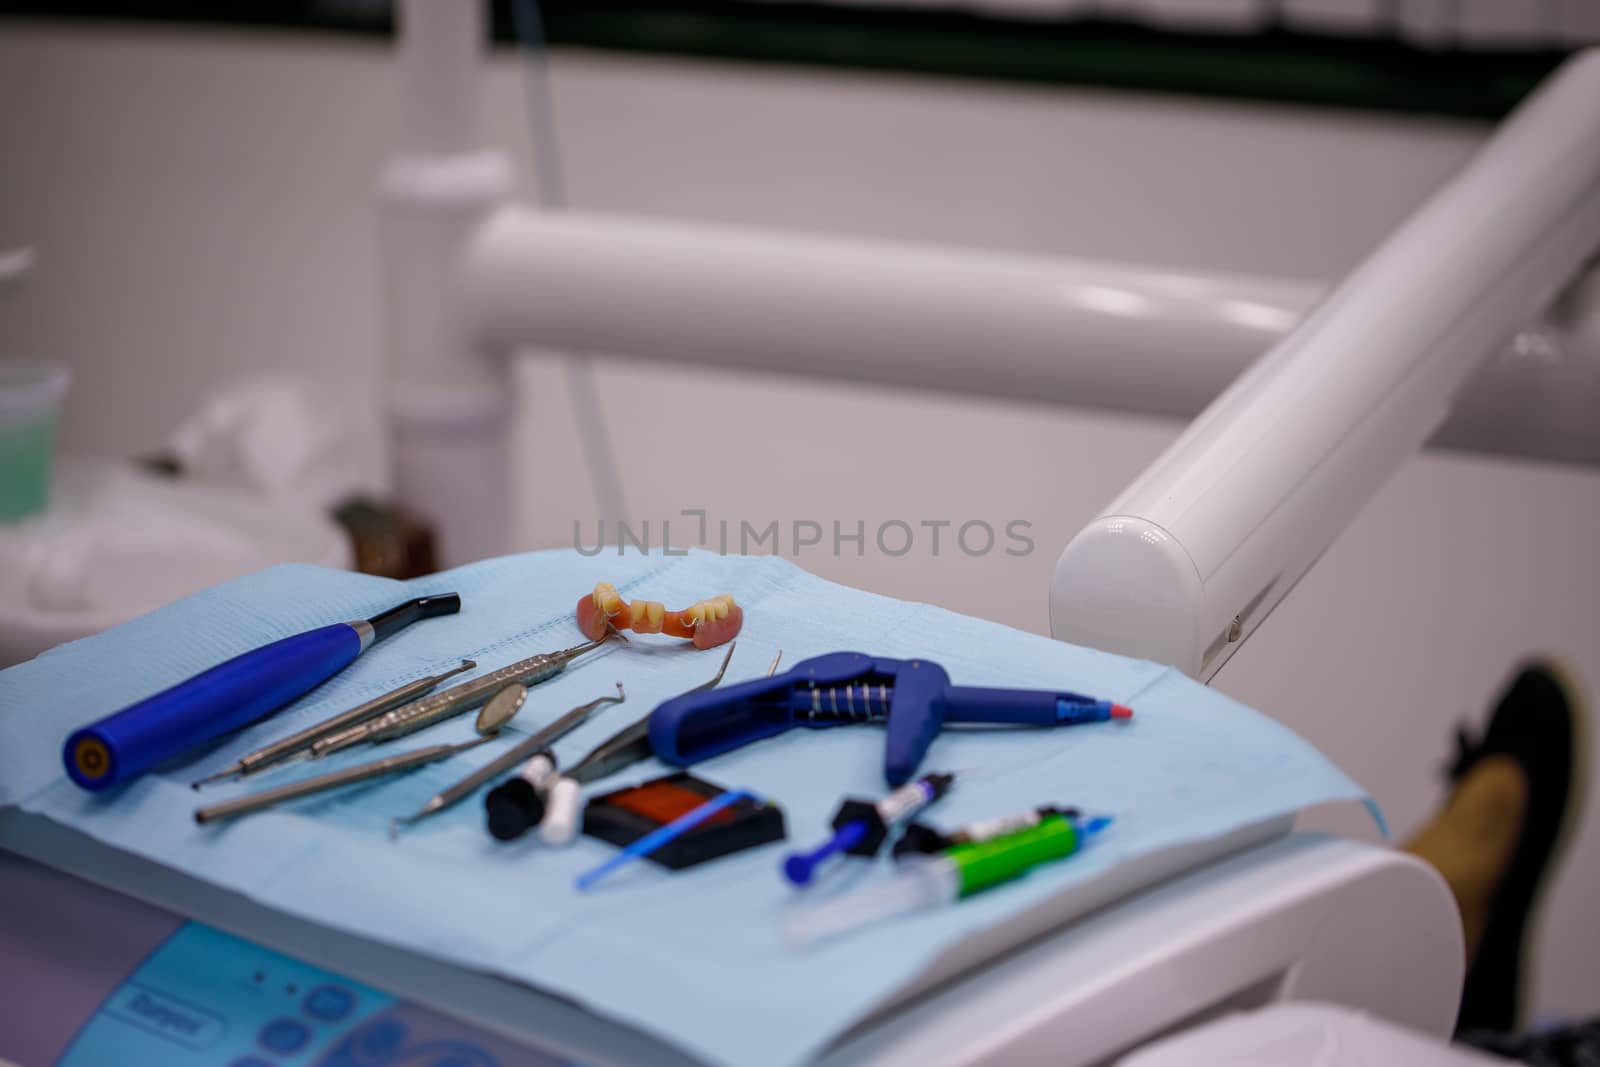 Set of Dentist 's medical equipment tools on tray ready for patient treatment. Patient dentures on a medical tray with stomatologist tools and utensils. Concept of oral and tooth care by dugulan